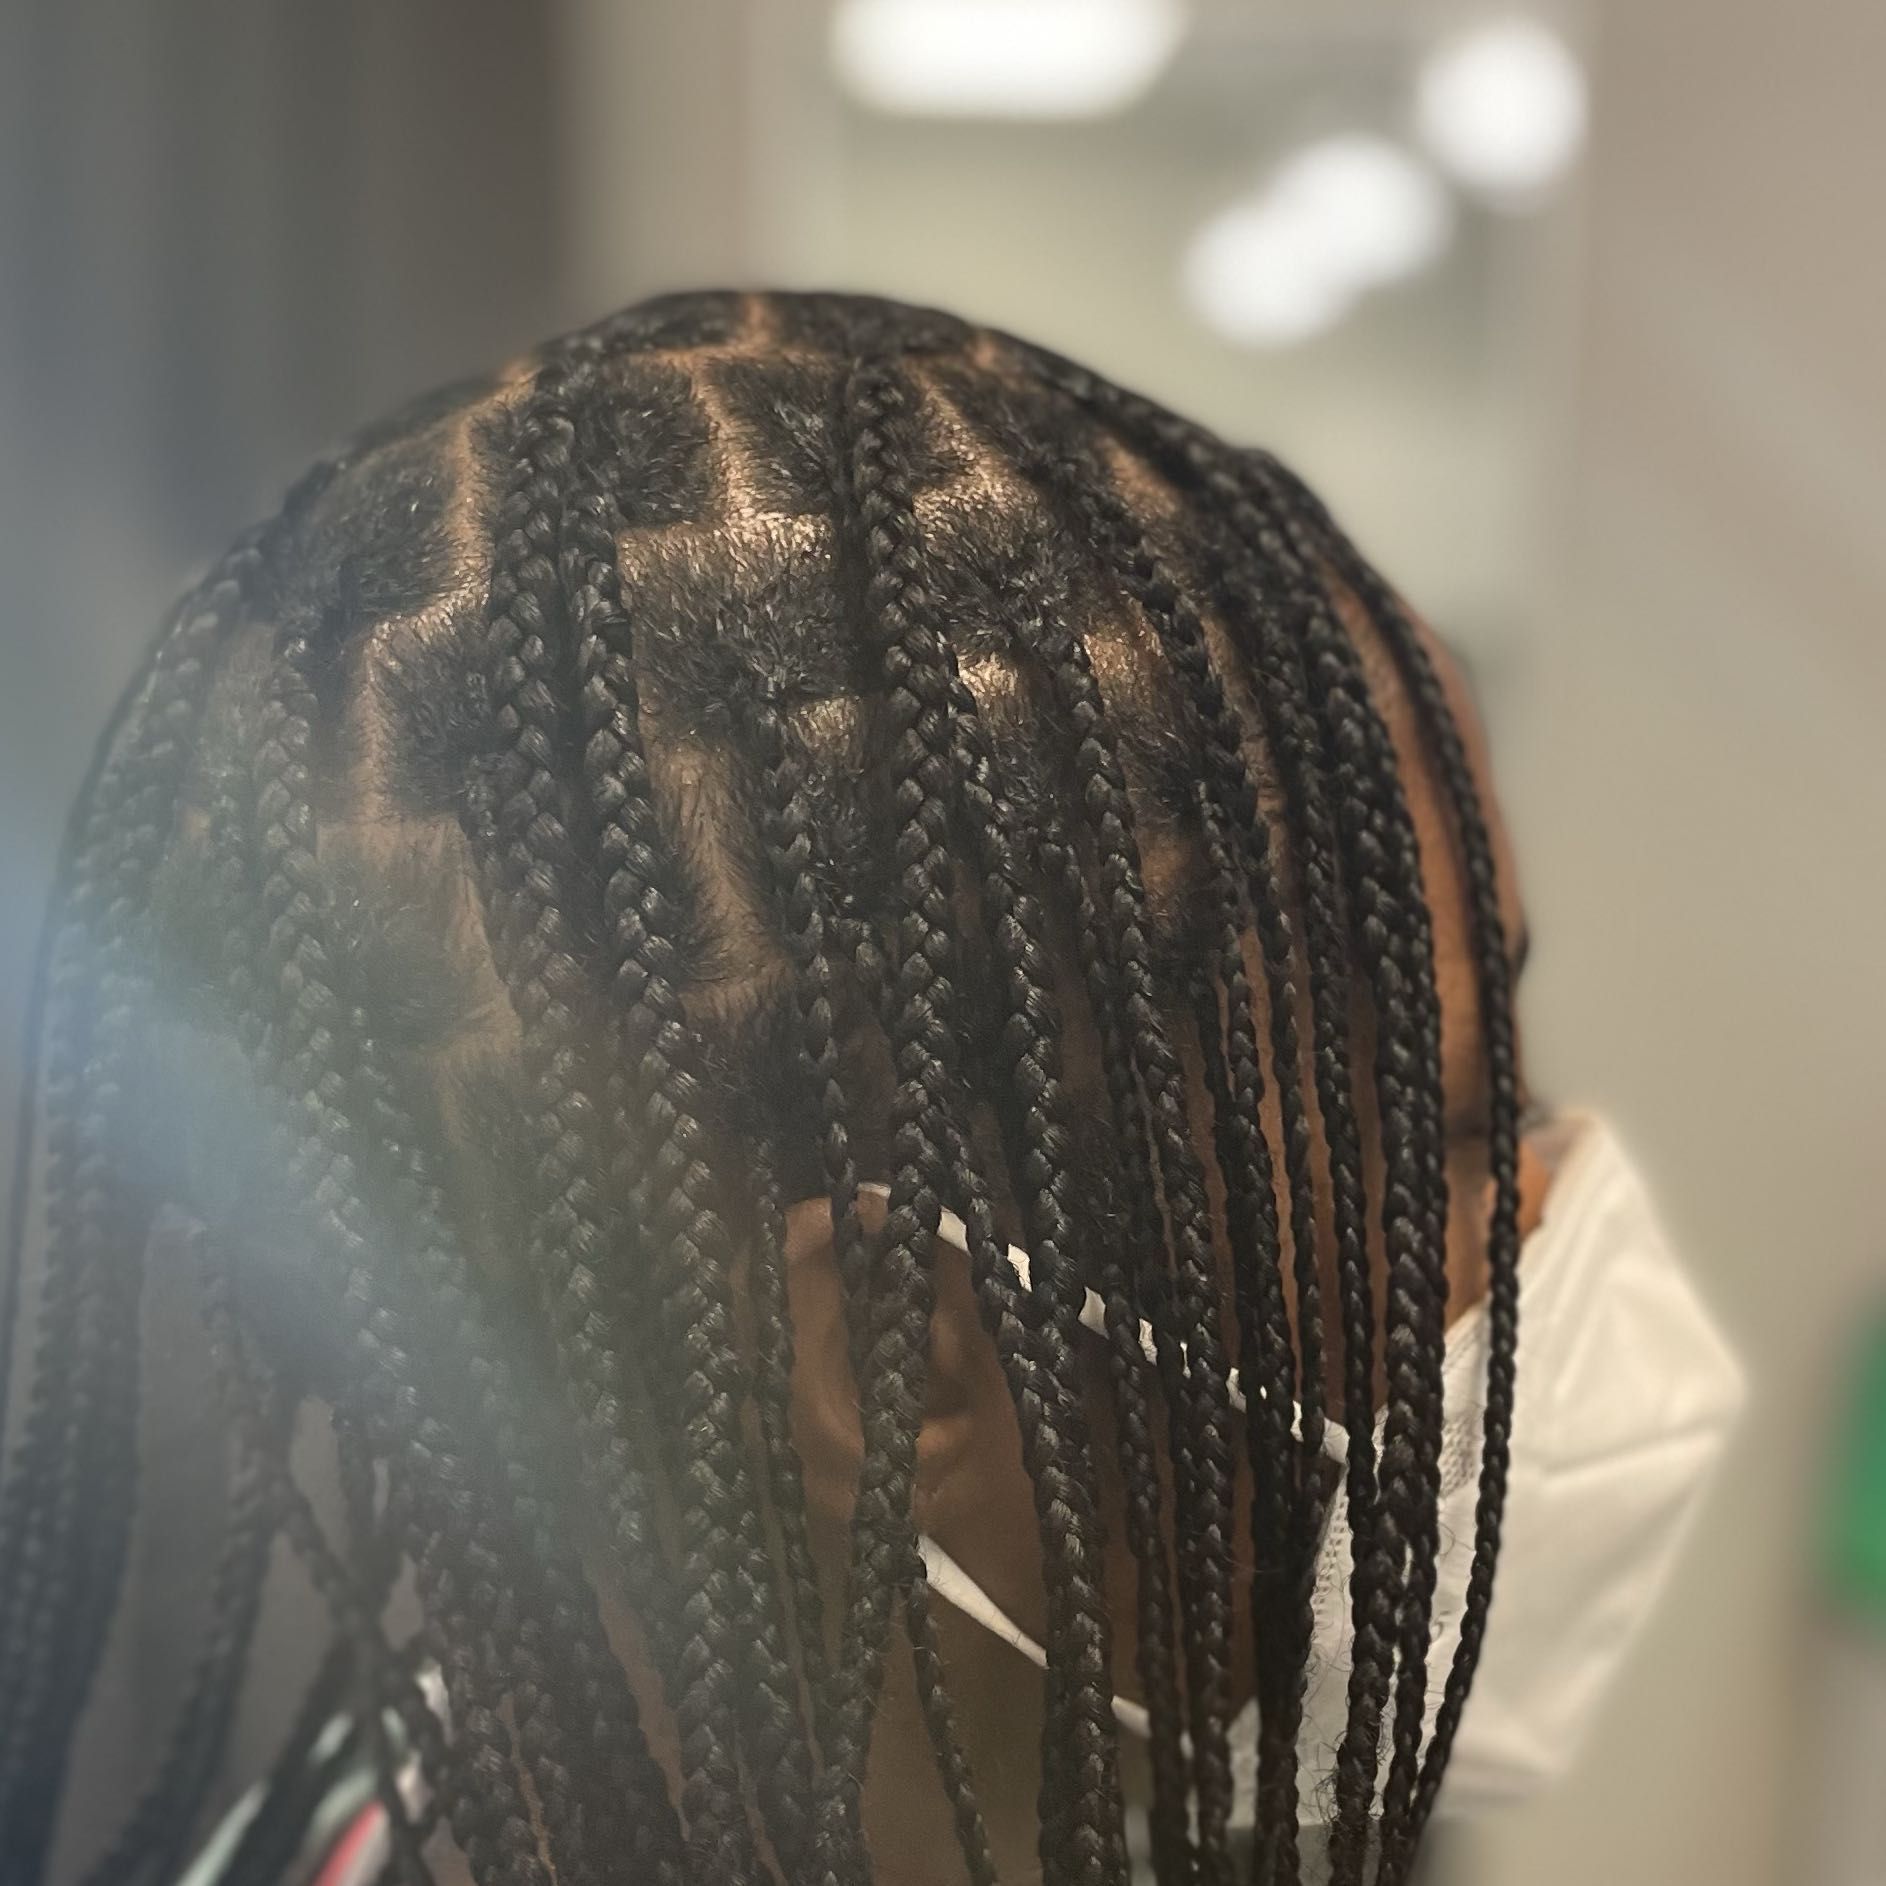 Protective Style: Front Touch-up portfolio